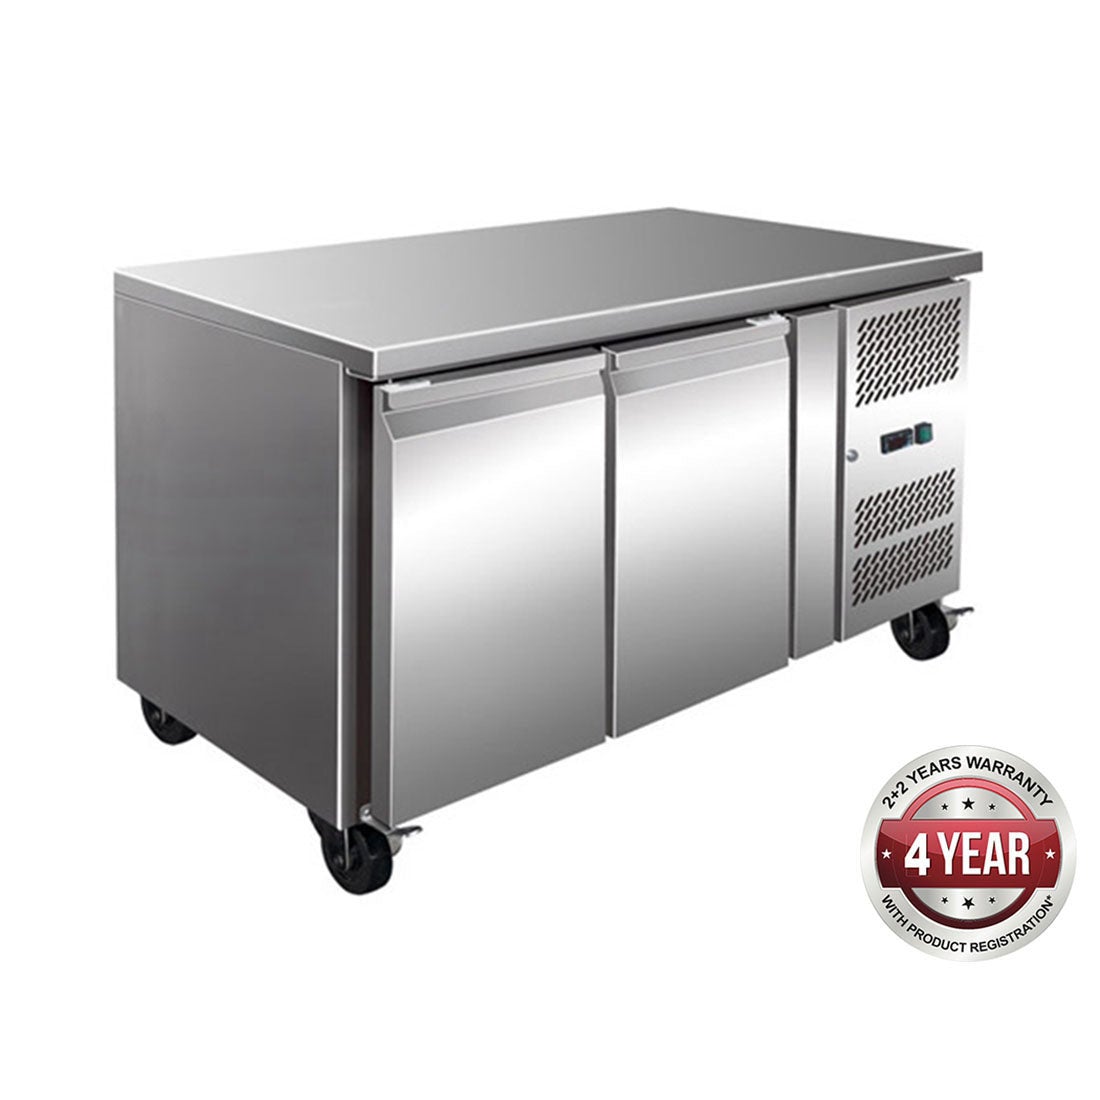 Thermaster Tropicalized ISED 2 Door Gastronorm Bench Freezer GN2100BT Under Bench Freezers